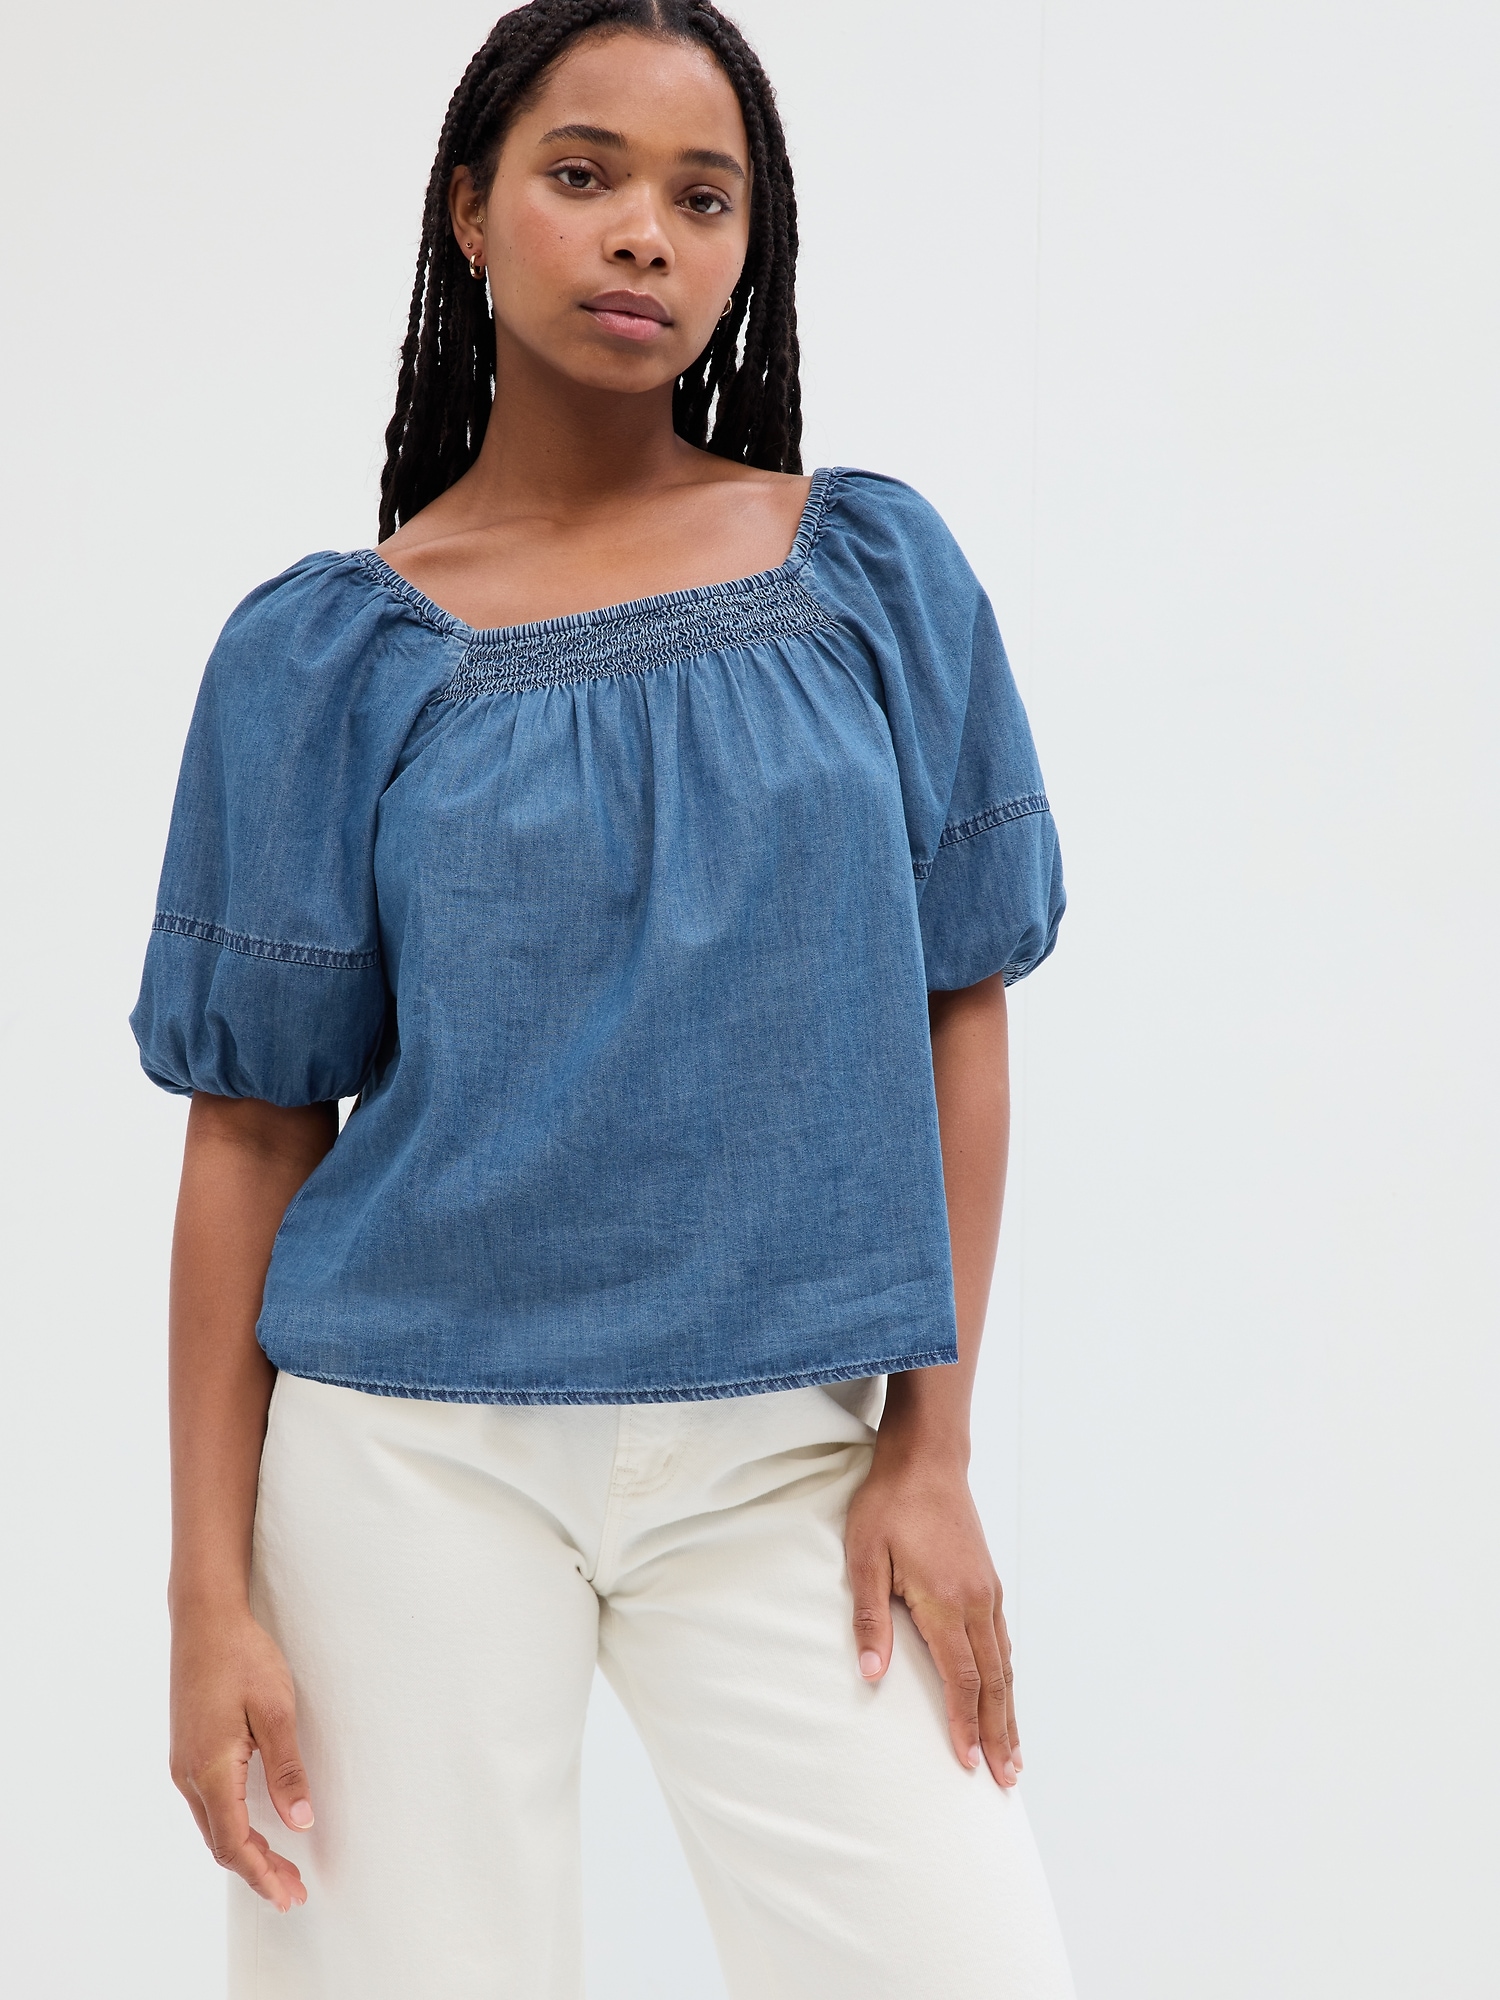 Denim Squareneck Top with Washwell